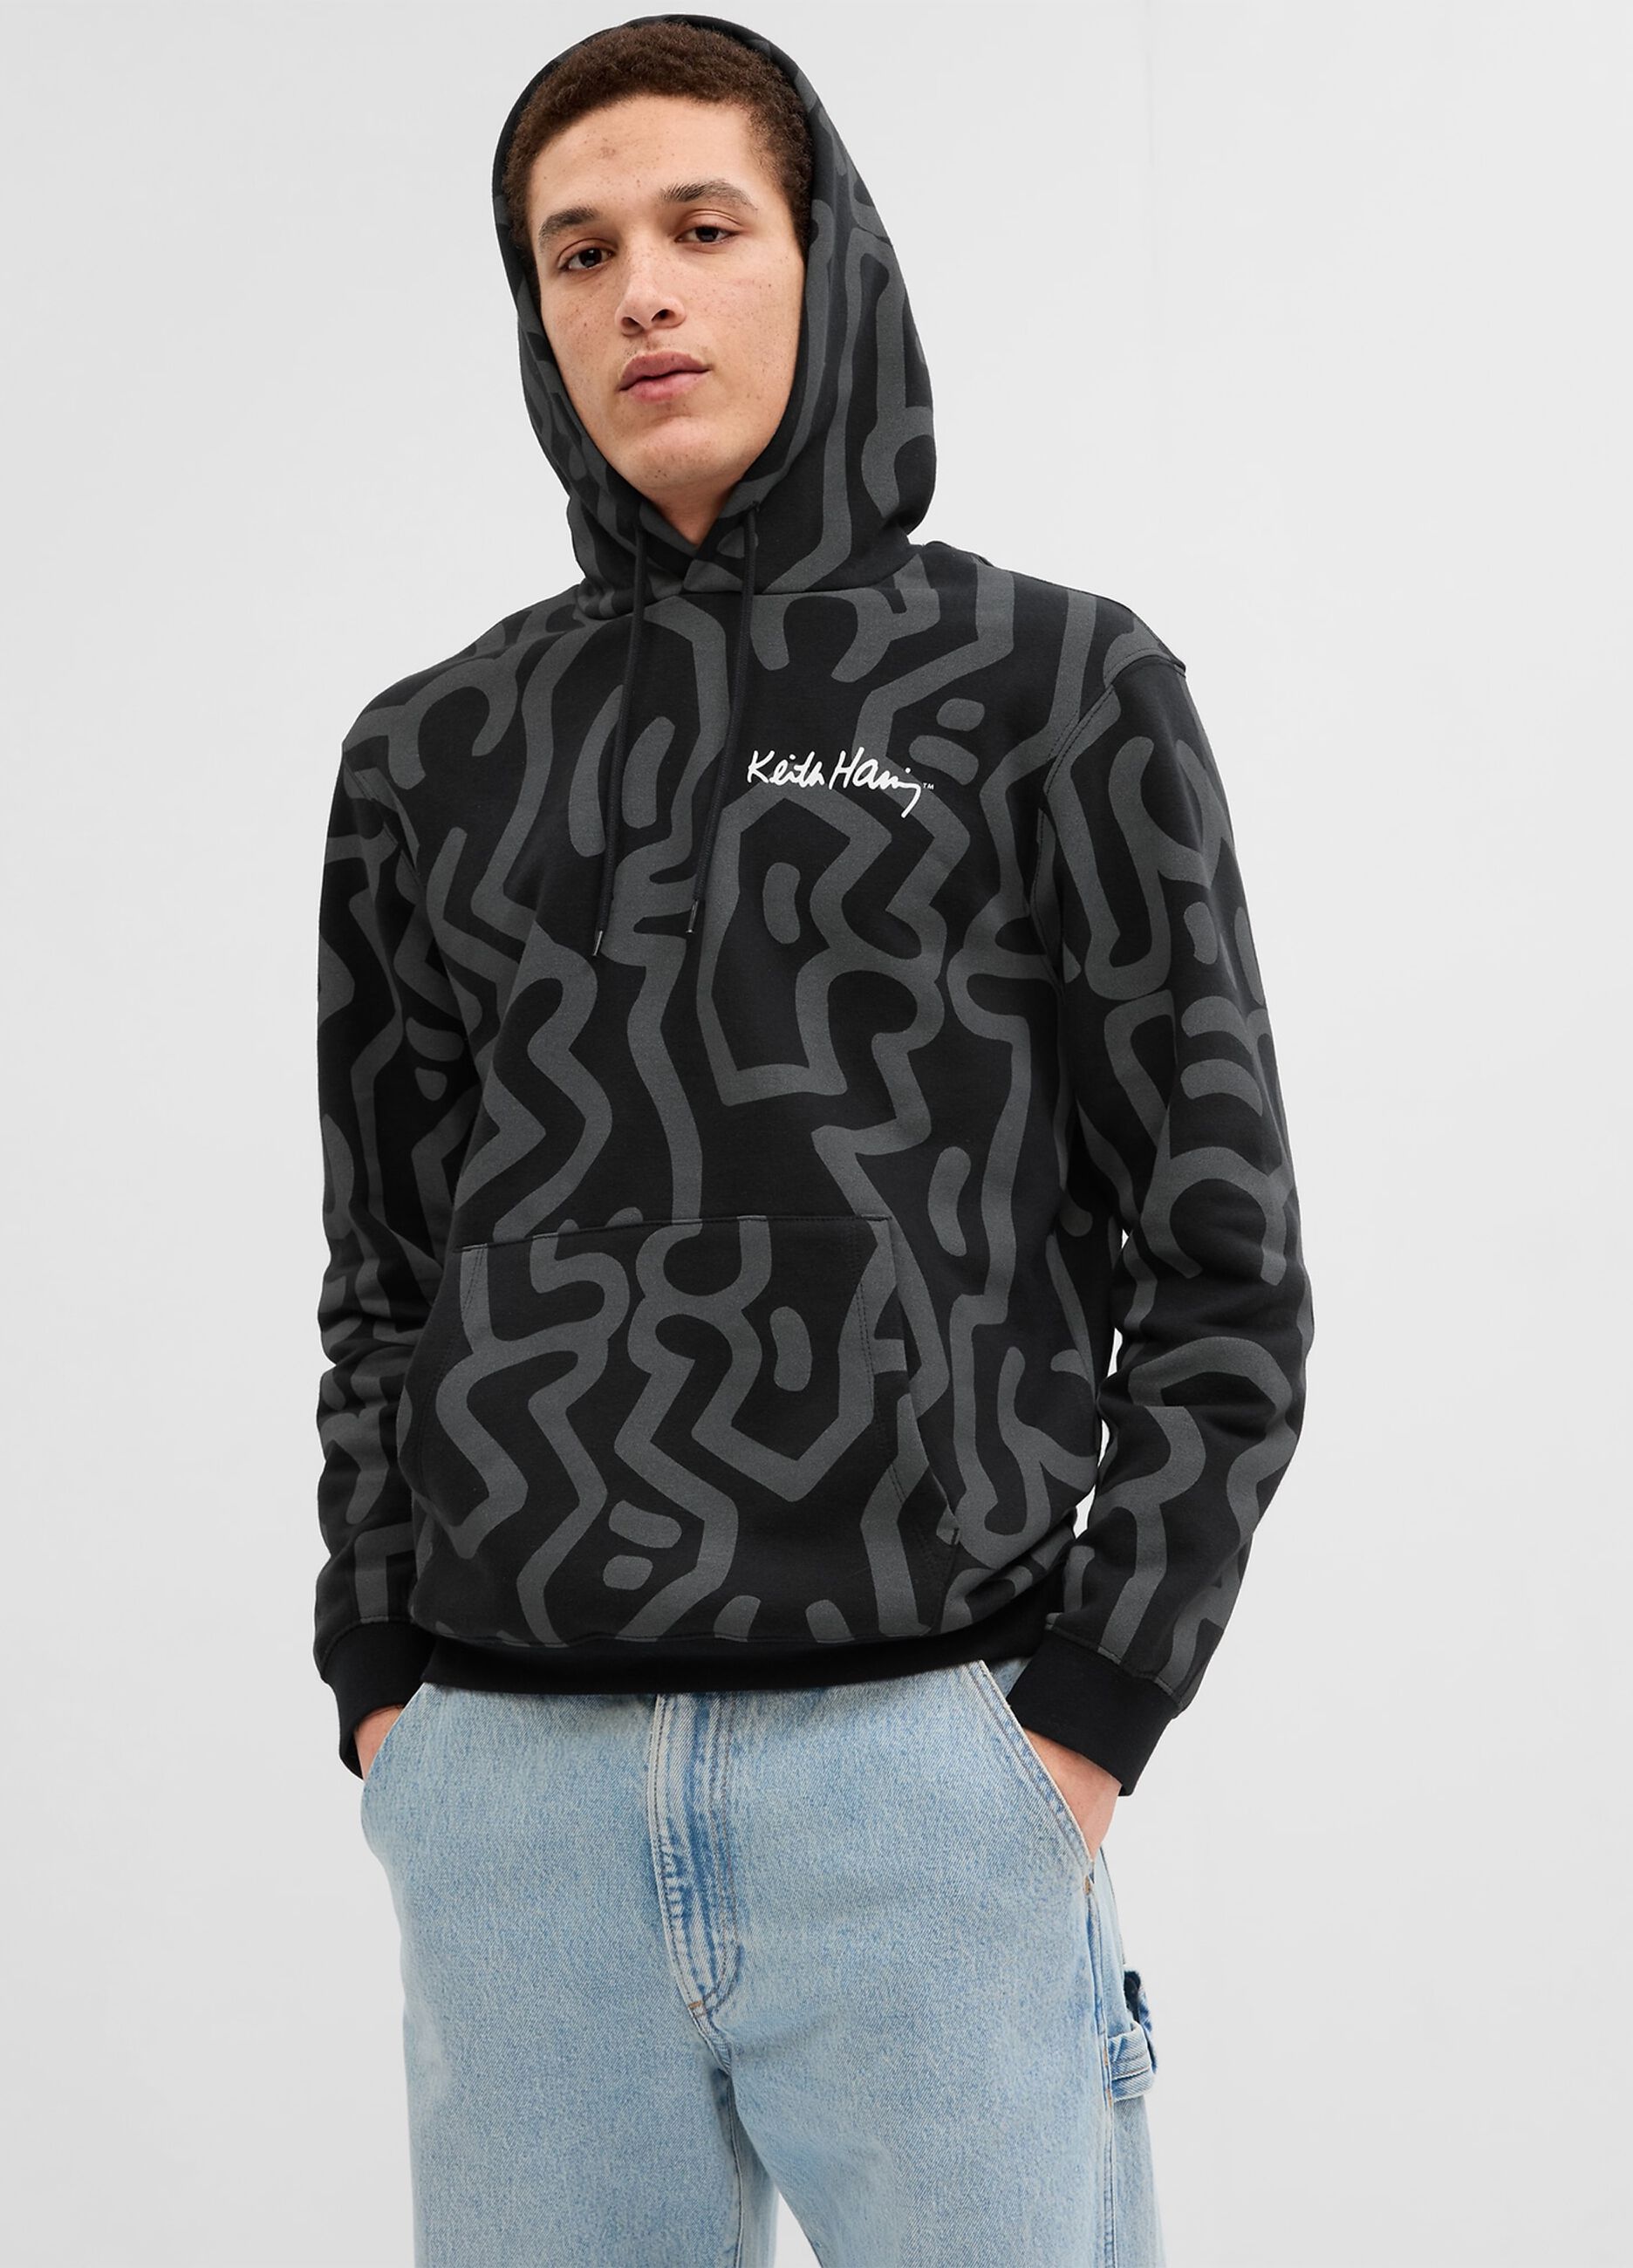 Hoodie with Keith Haring print